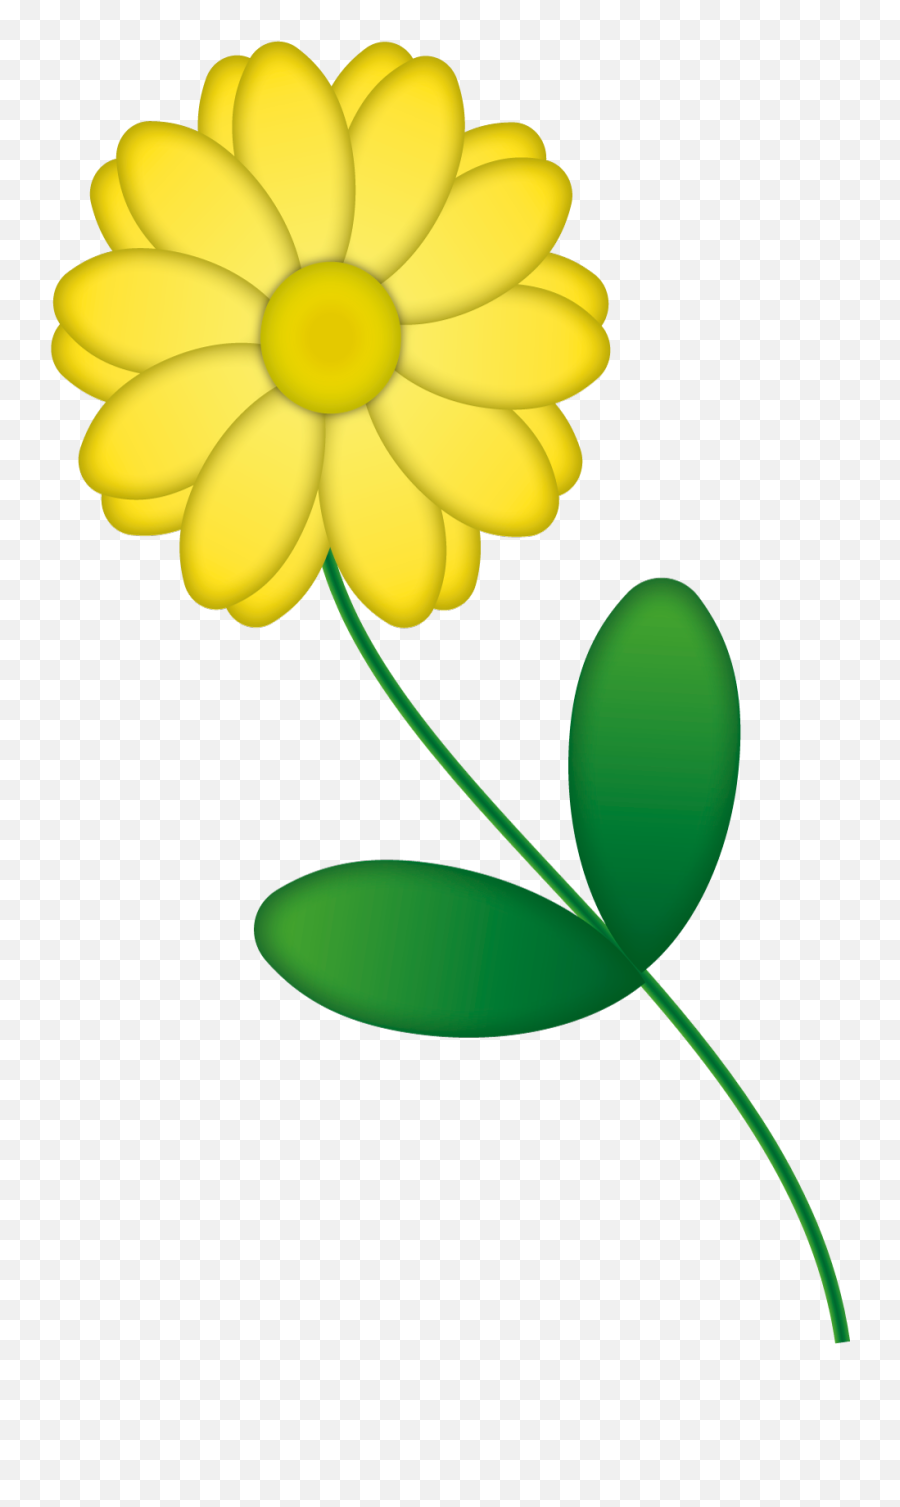 Drawing Of An Isolated Yellow Flower Free Image - Flor Amarela Png Desenho,Yellow Flower Transparent